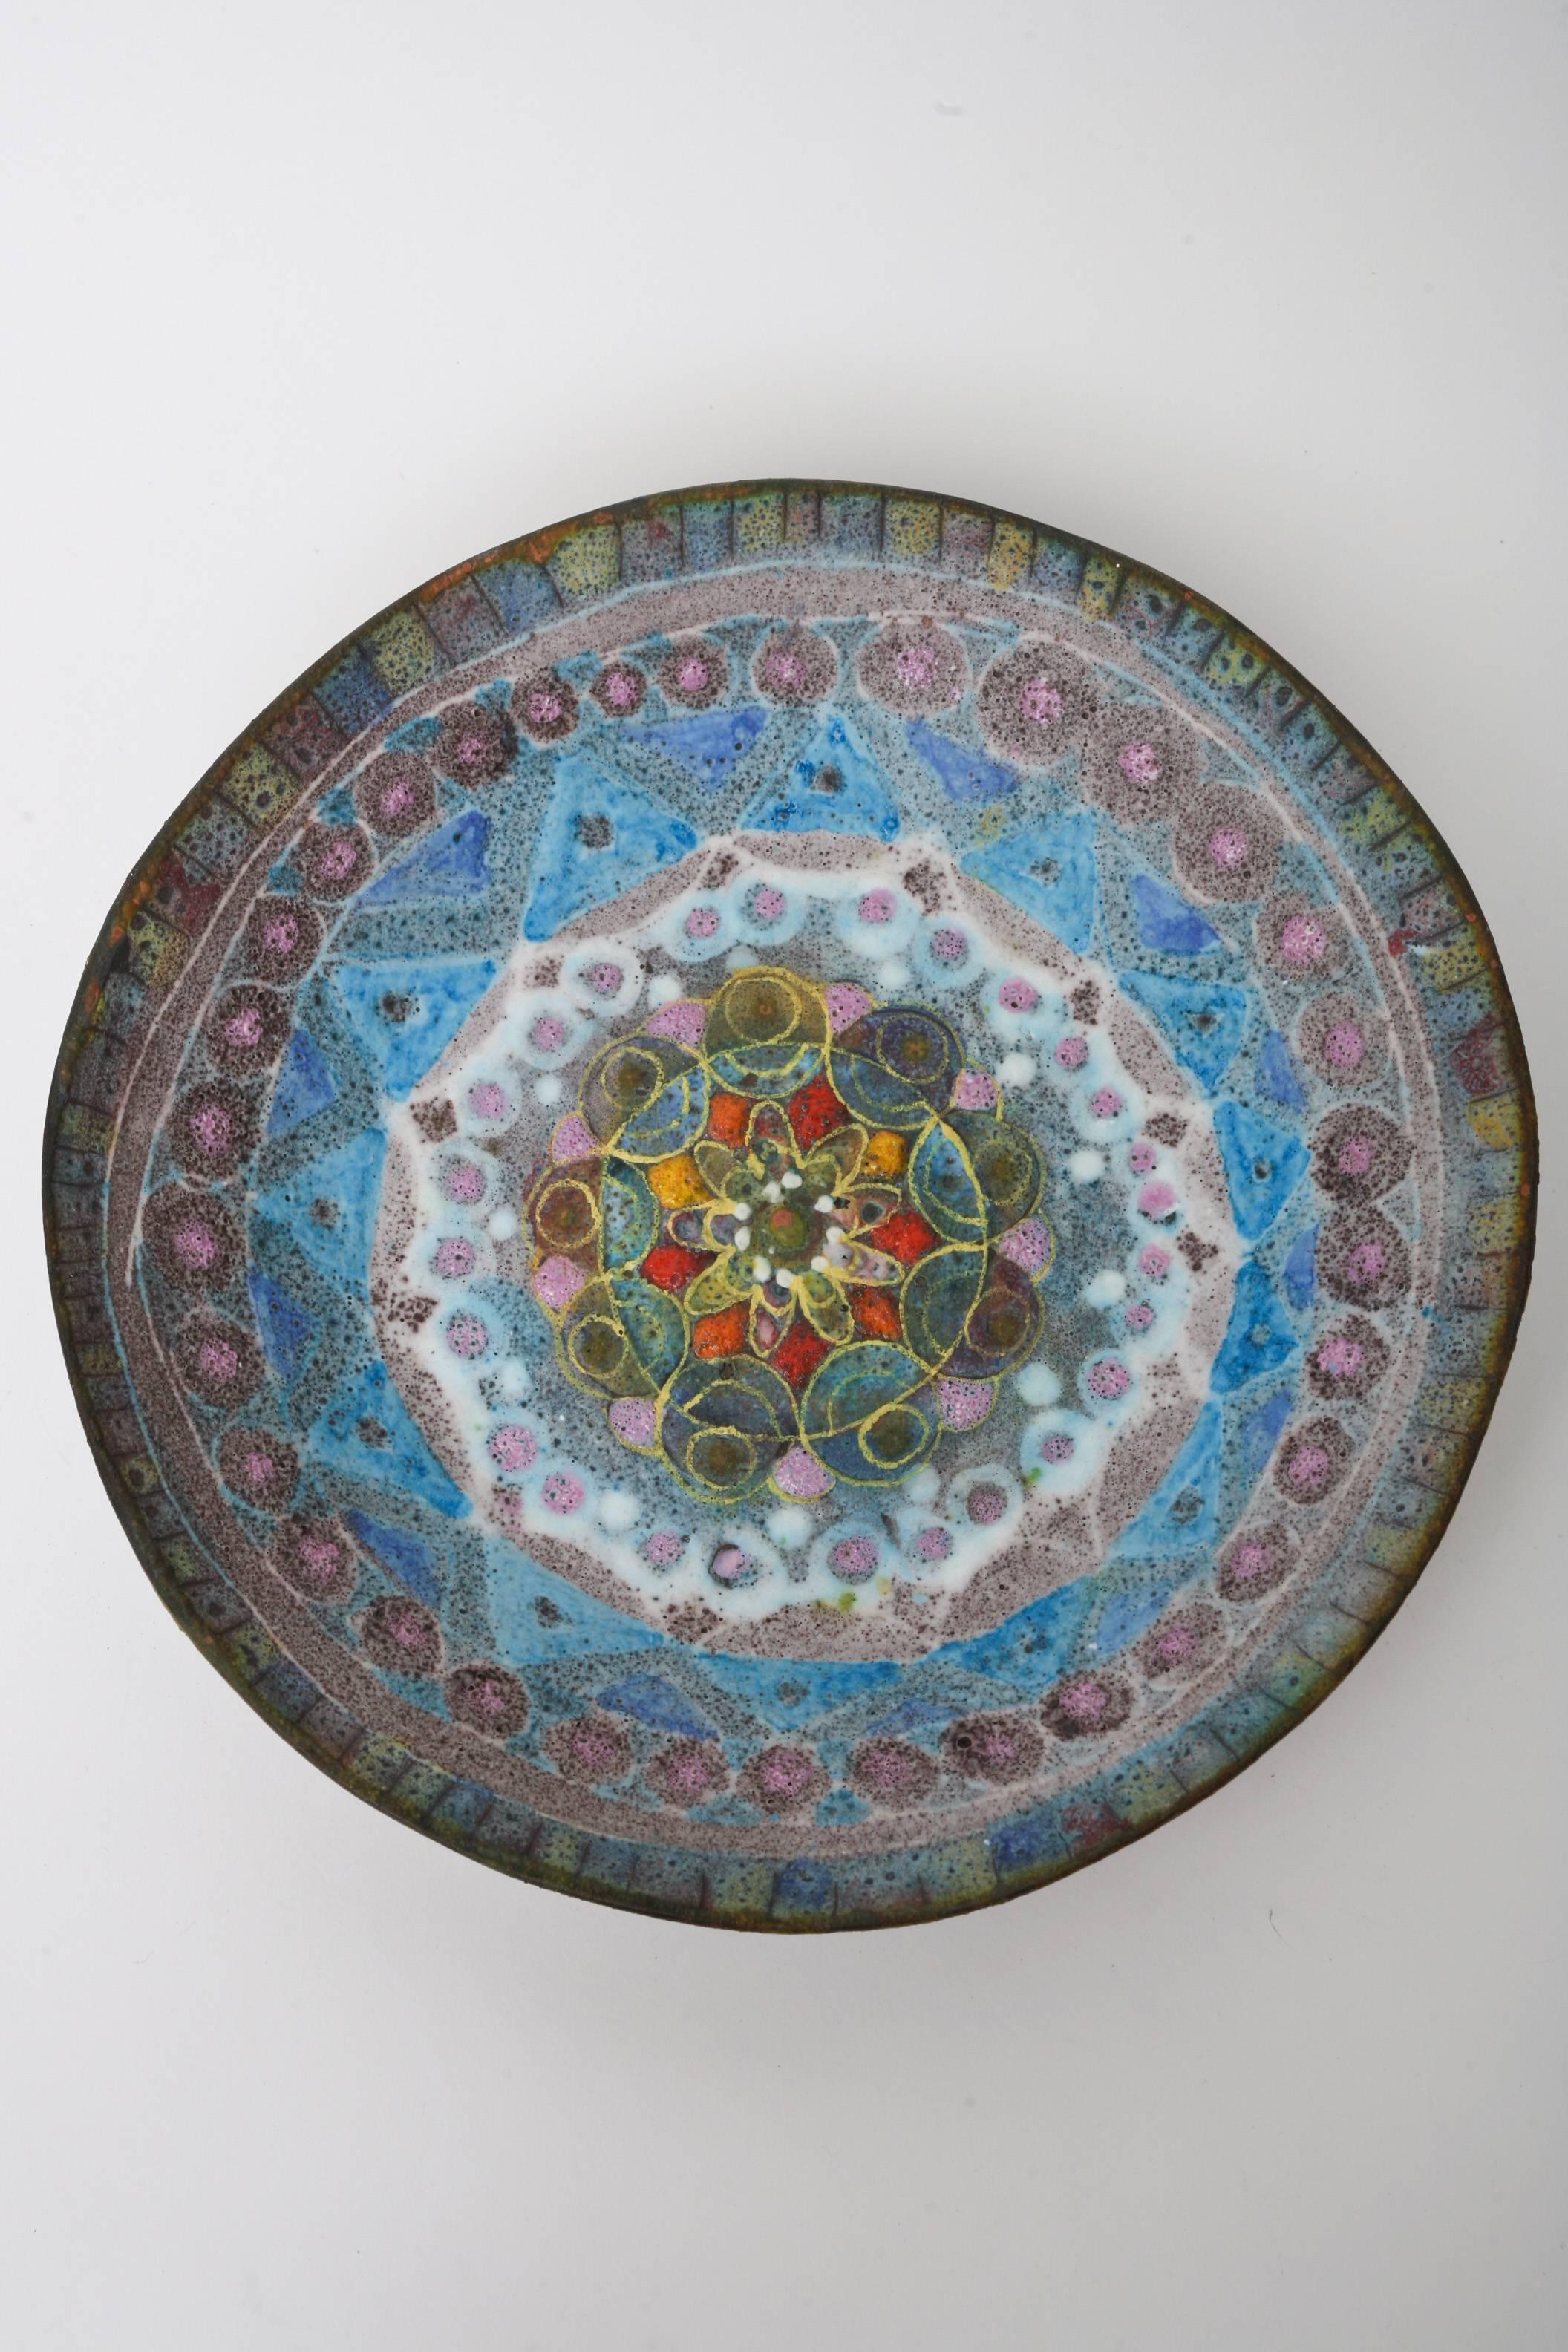 The beautiful pattern and intricacies of this geometric textural Italian salt glaze ceramic vintage bowl has great influence and style of the work of the great Fantoni. The colors are exquisite, unusual and rich looking. It is a tapestry and weave